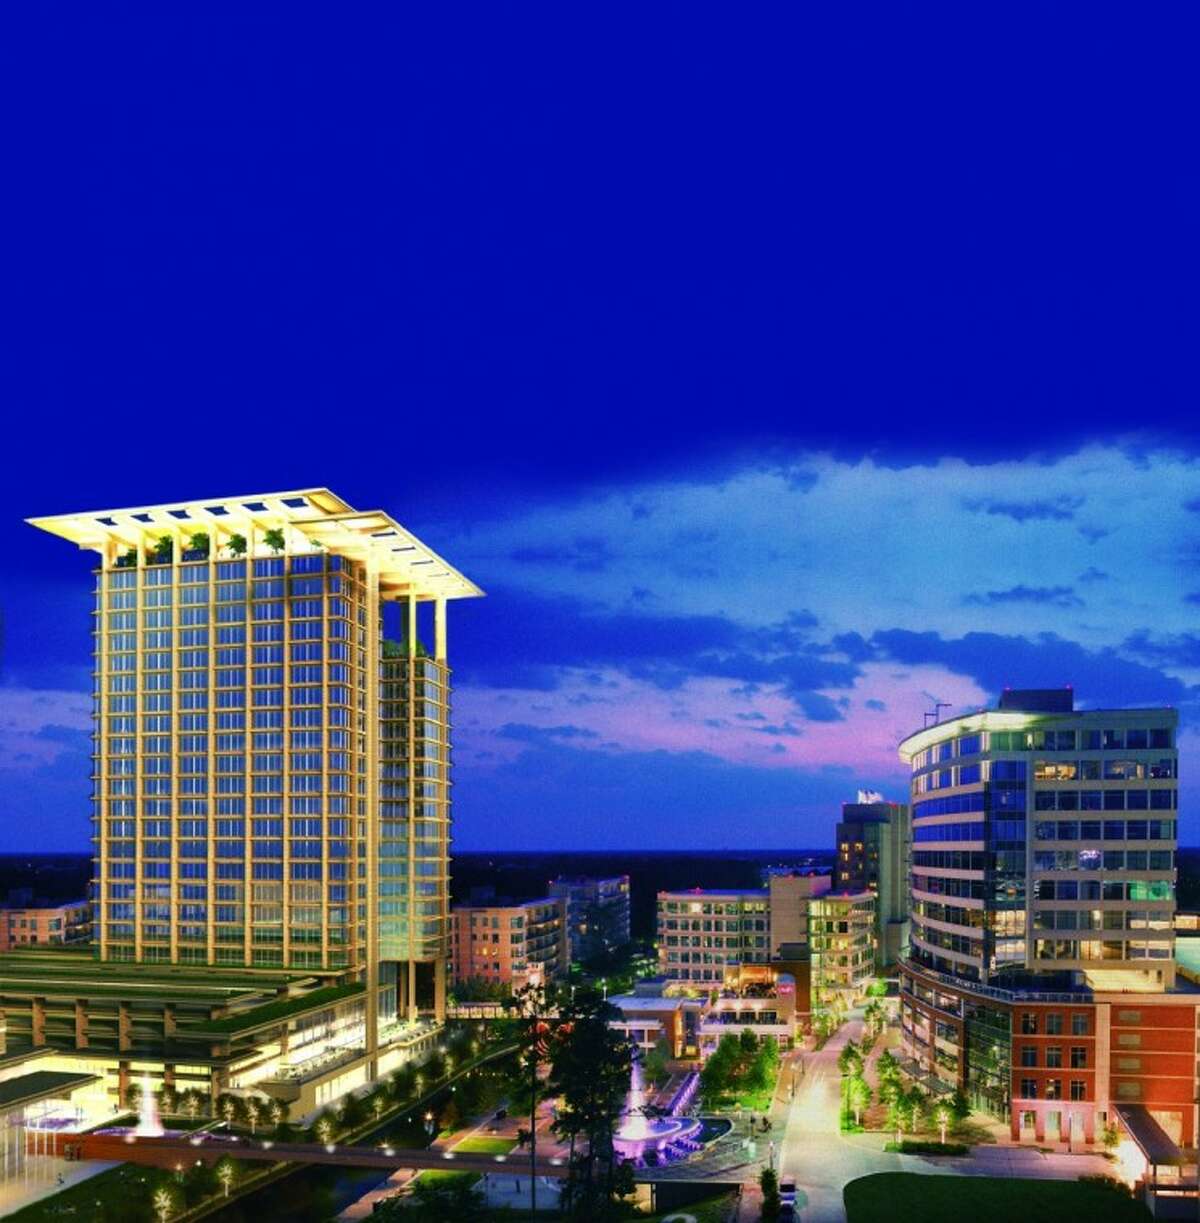 The Woodlands Development Company is now marketing a 20 story building at 10 Waterway Ave. The office building will be with tallest on the Waterway and span 500,000 square feet.